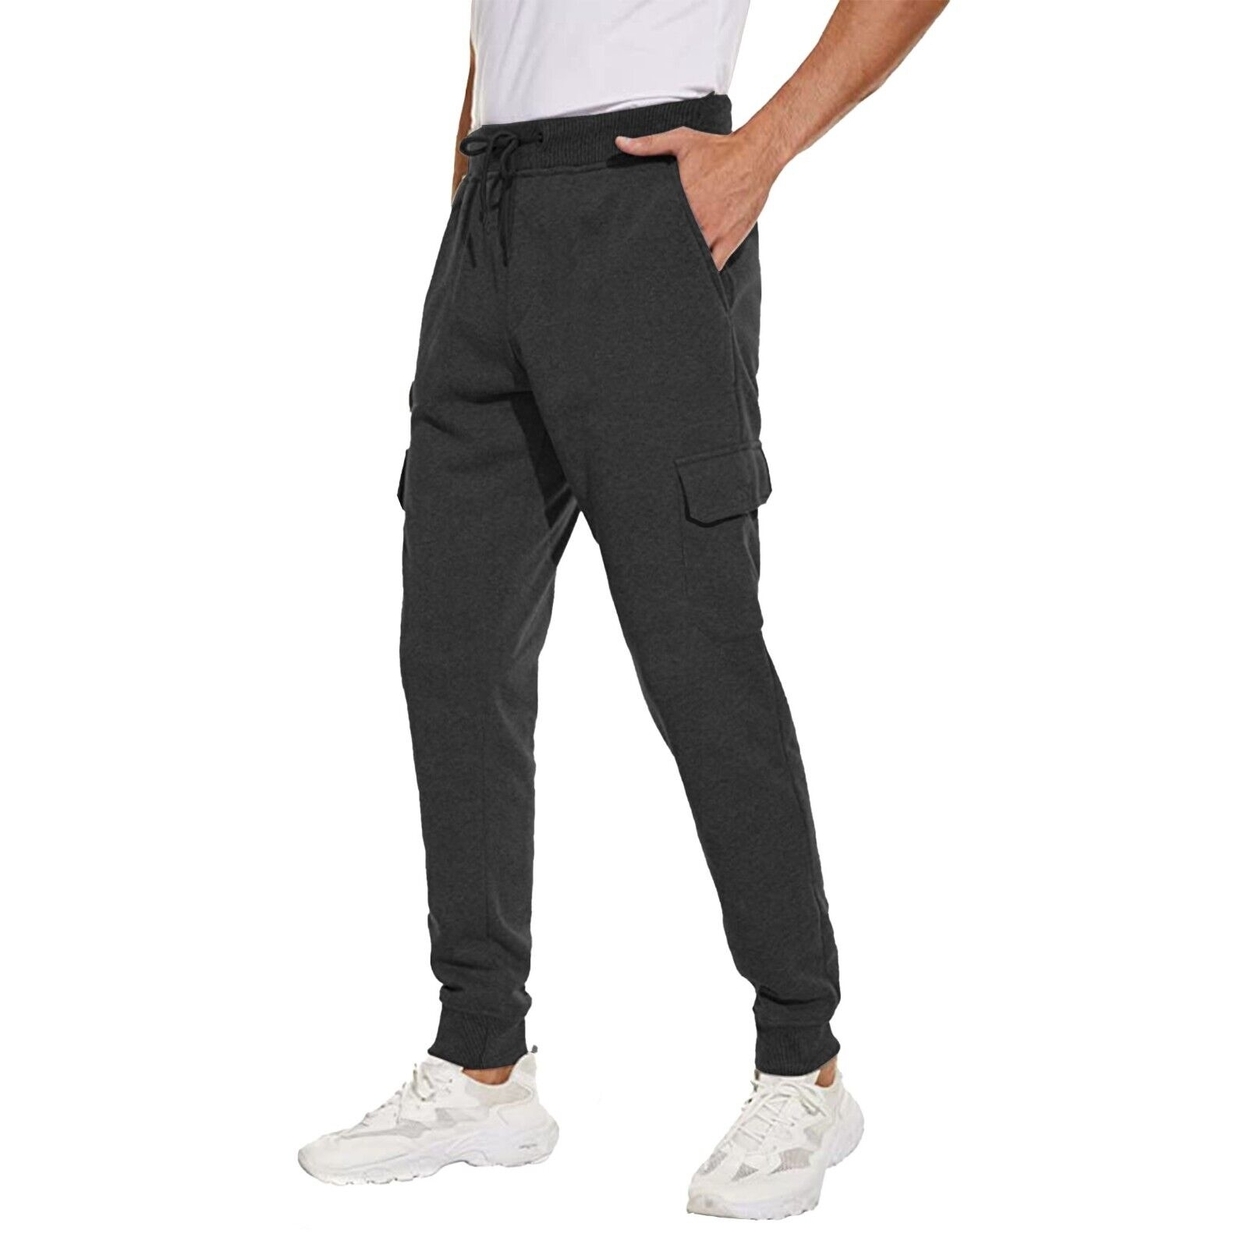 Men's Ultra Soft Winter Warm Thick Sweat Pant Athletic Sherpa Lined Jogger Pants - Charcoal, Small